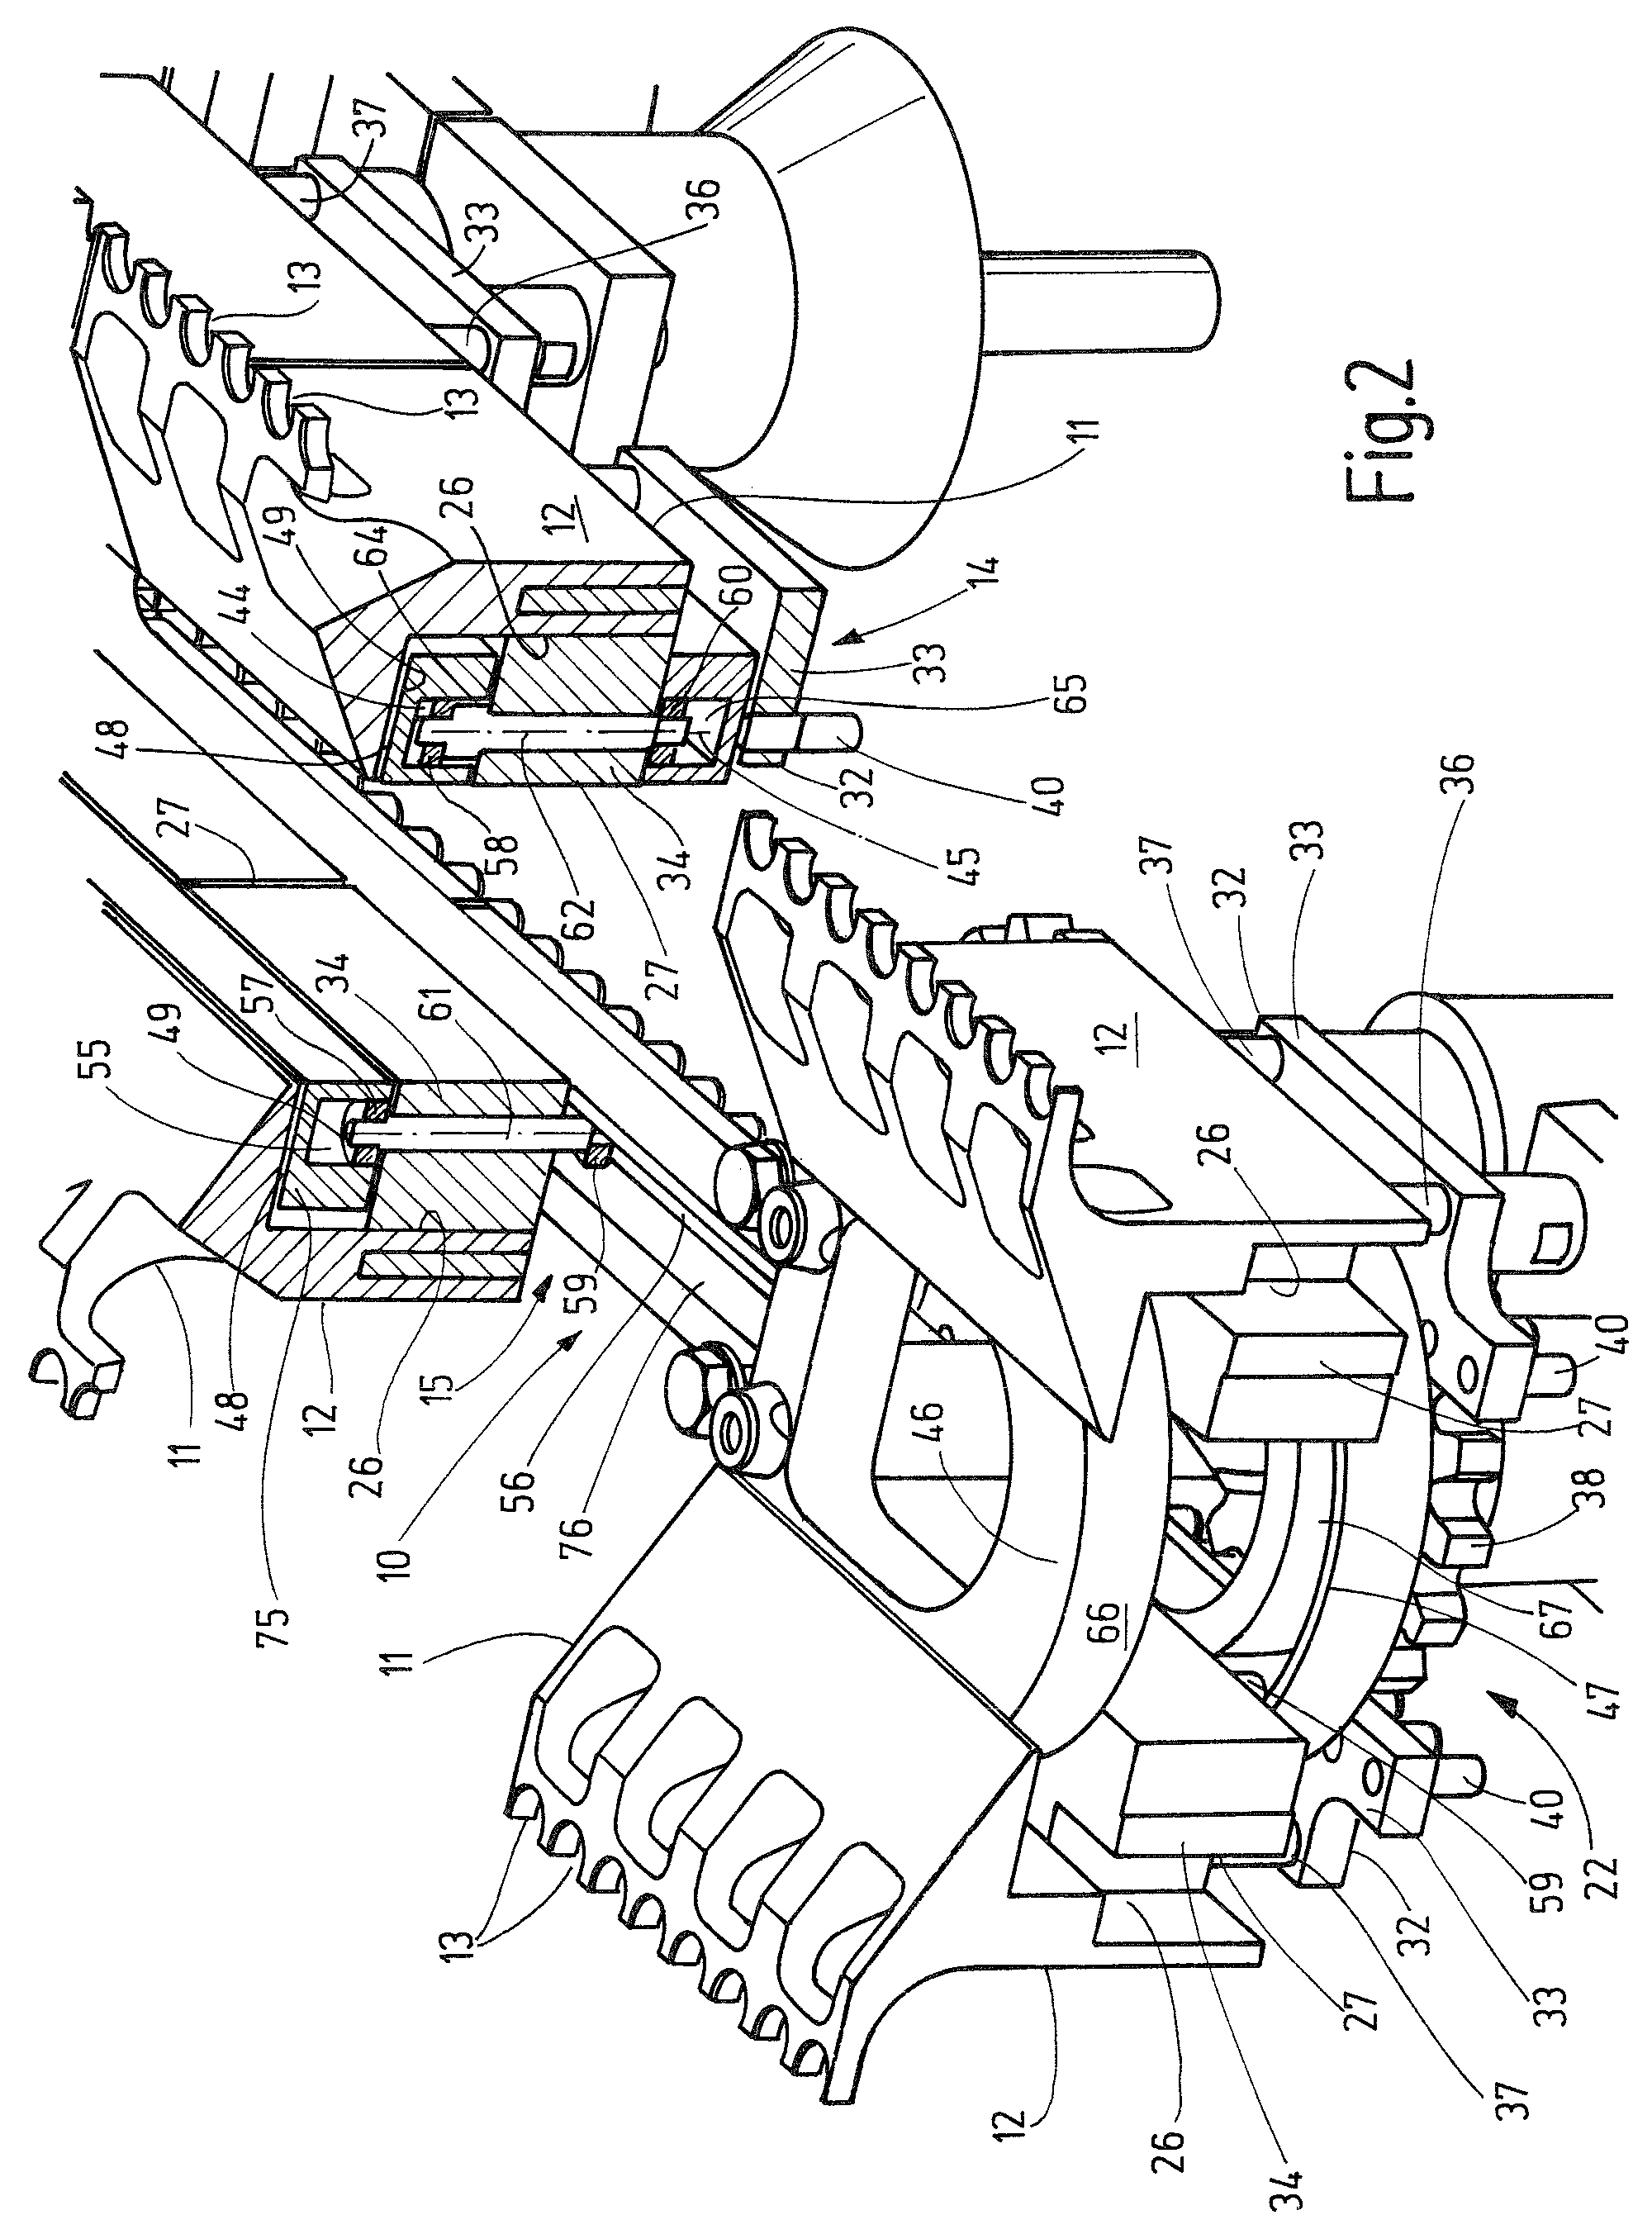 Apparatus for transporting containers to at least one processing station